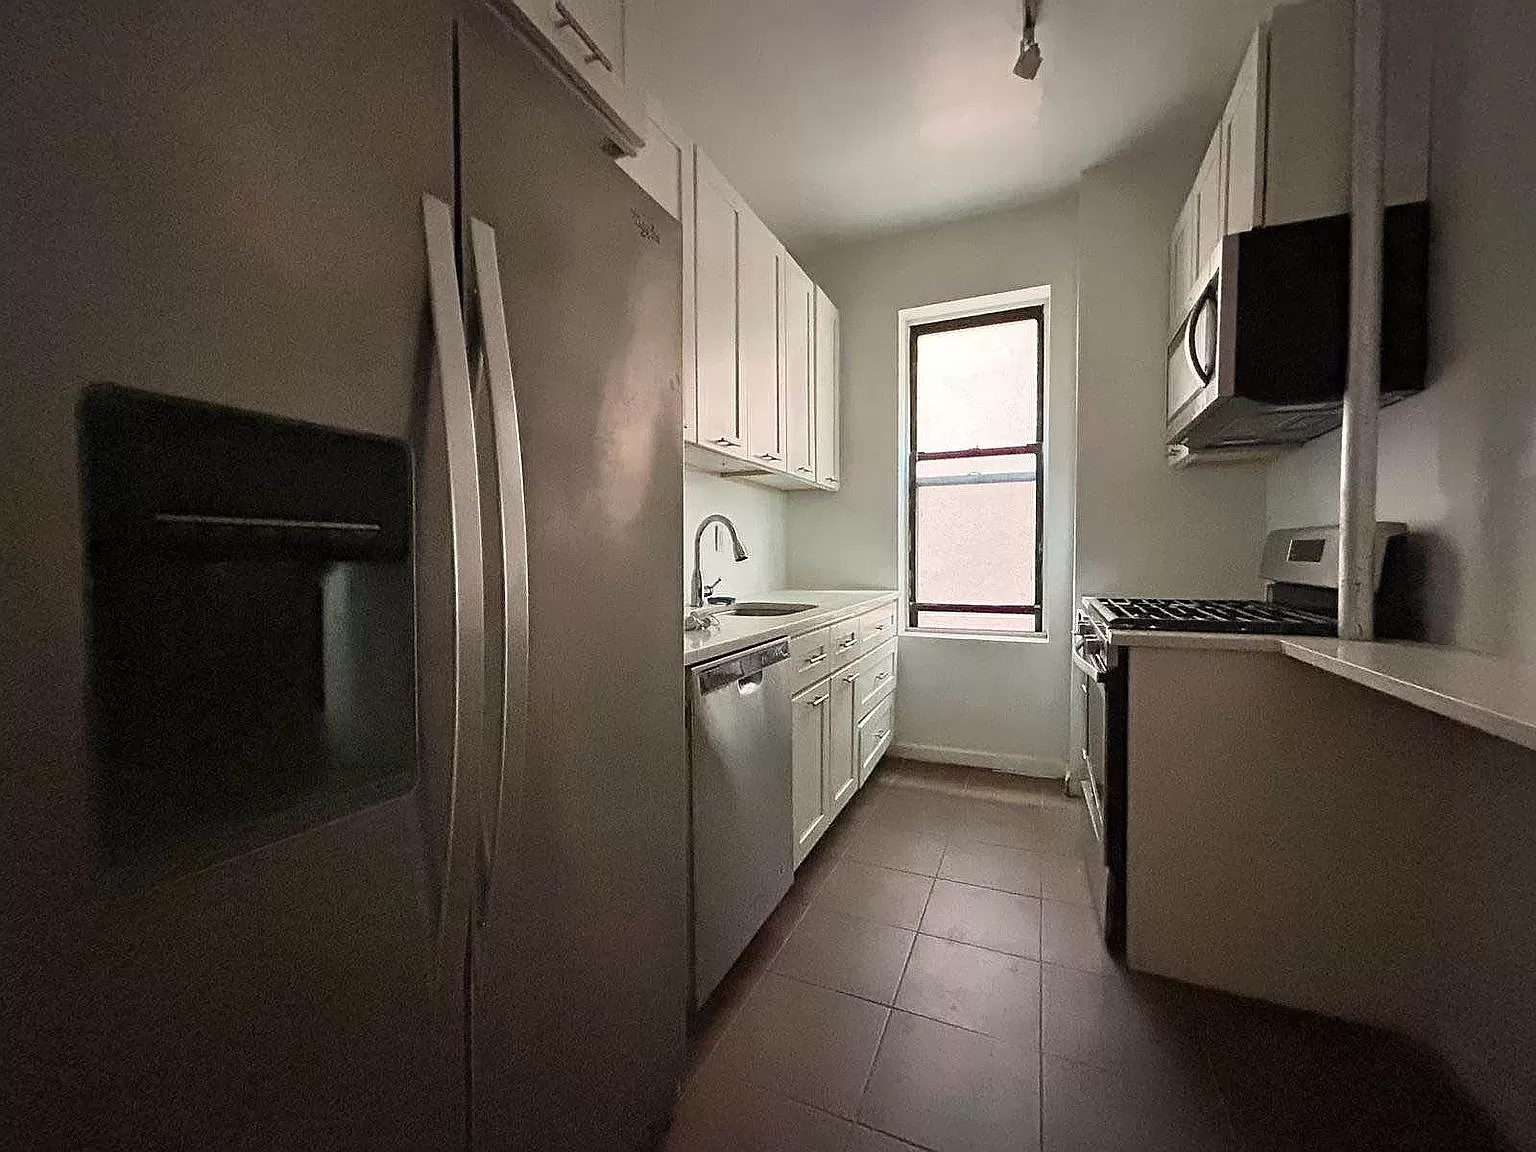 One Bed Property Available for Rent in Crown Heights, Brooklyn NY